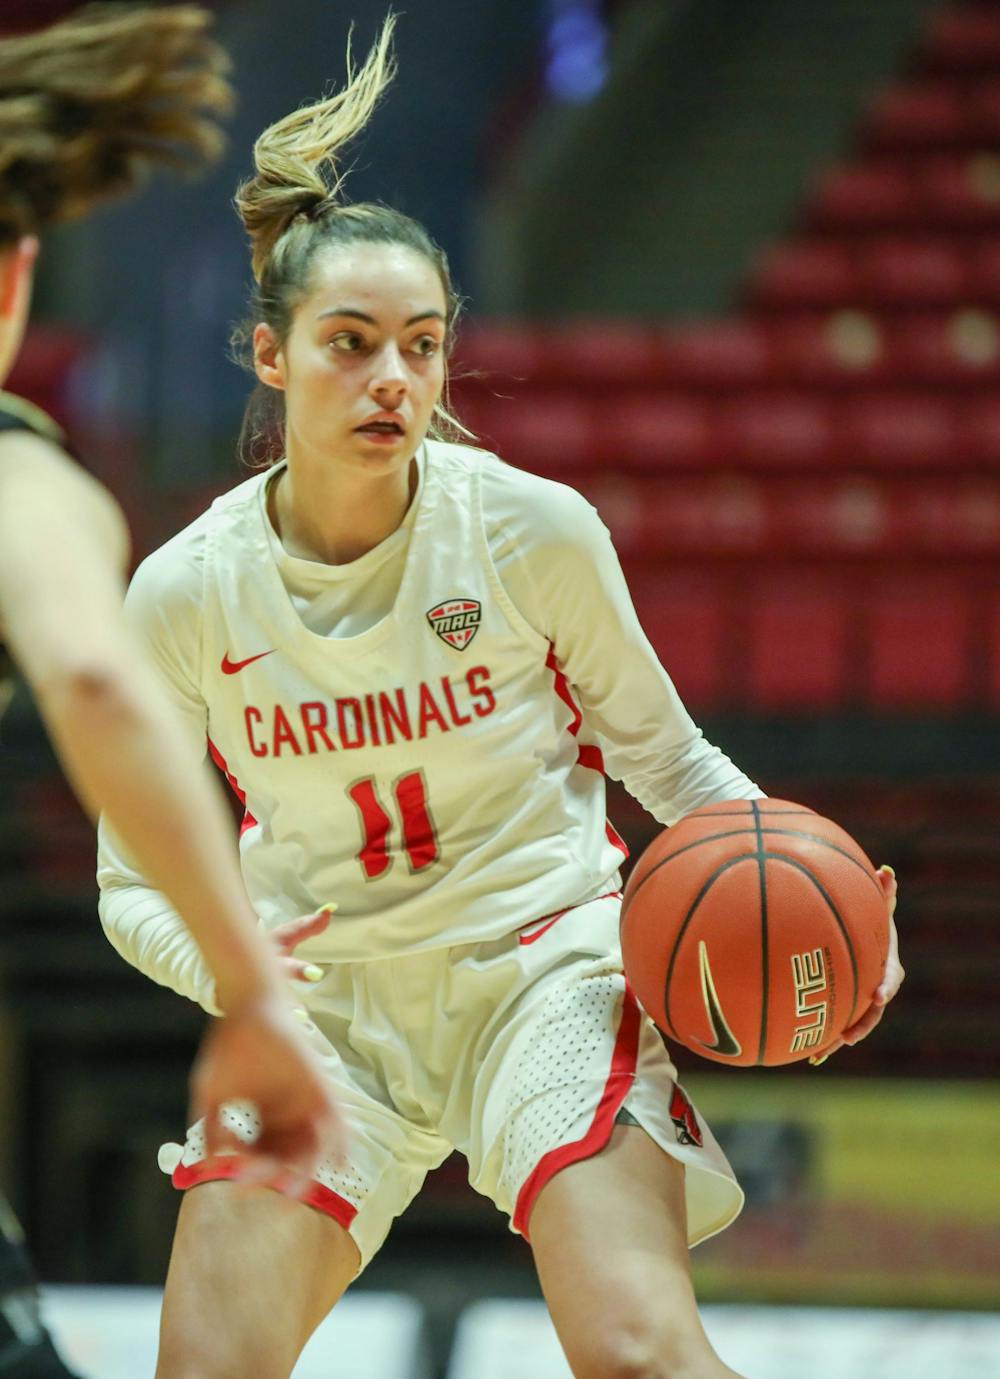 The Cardinals show ‘guts’ to pull out overtime victory over Huskies